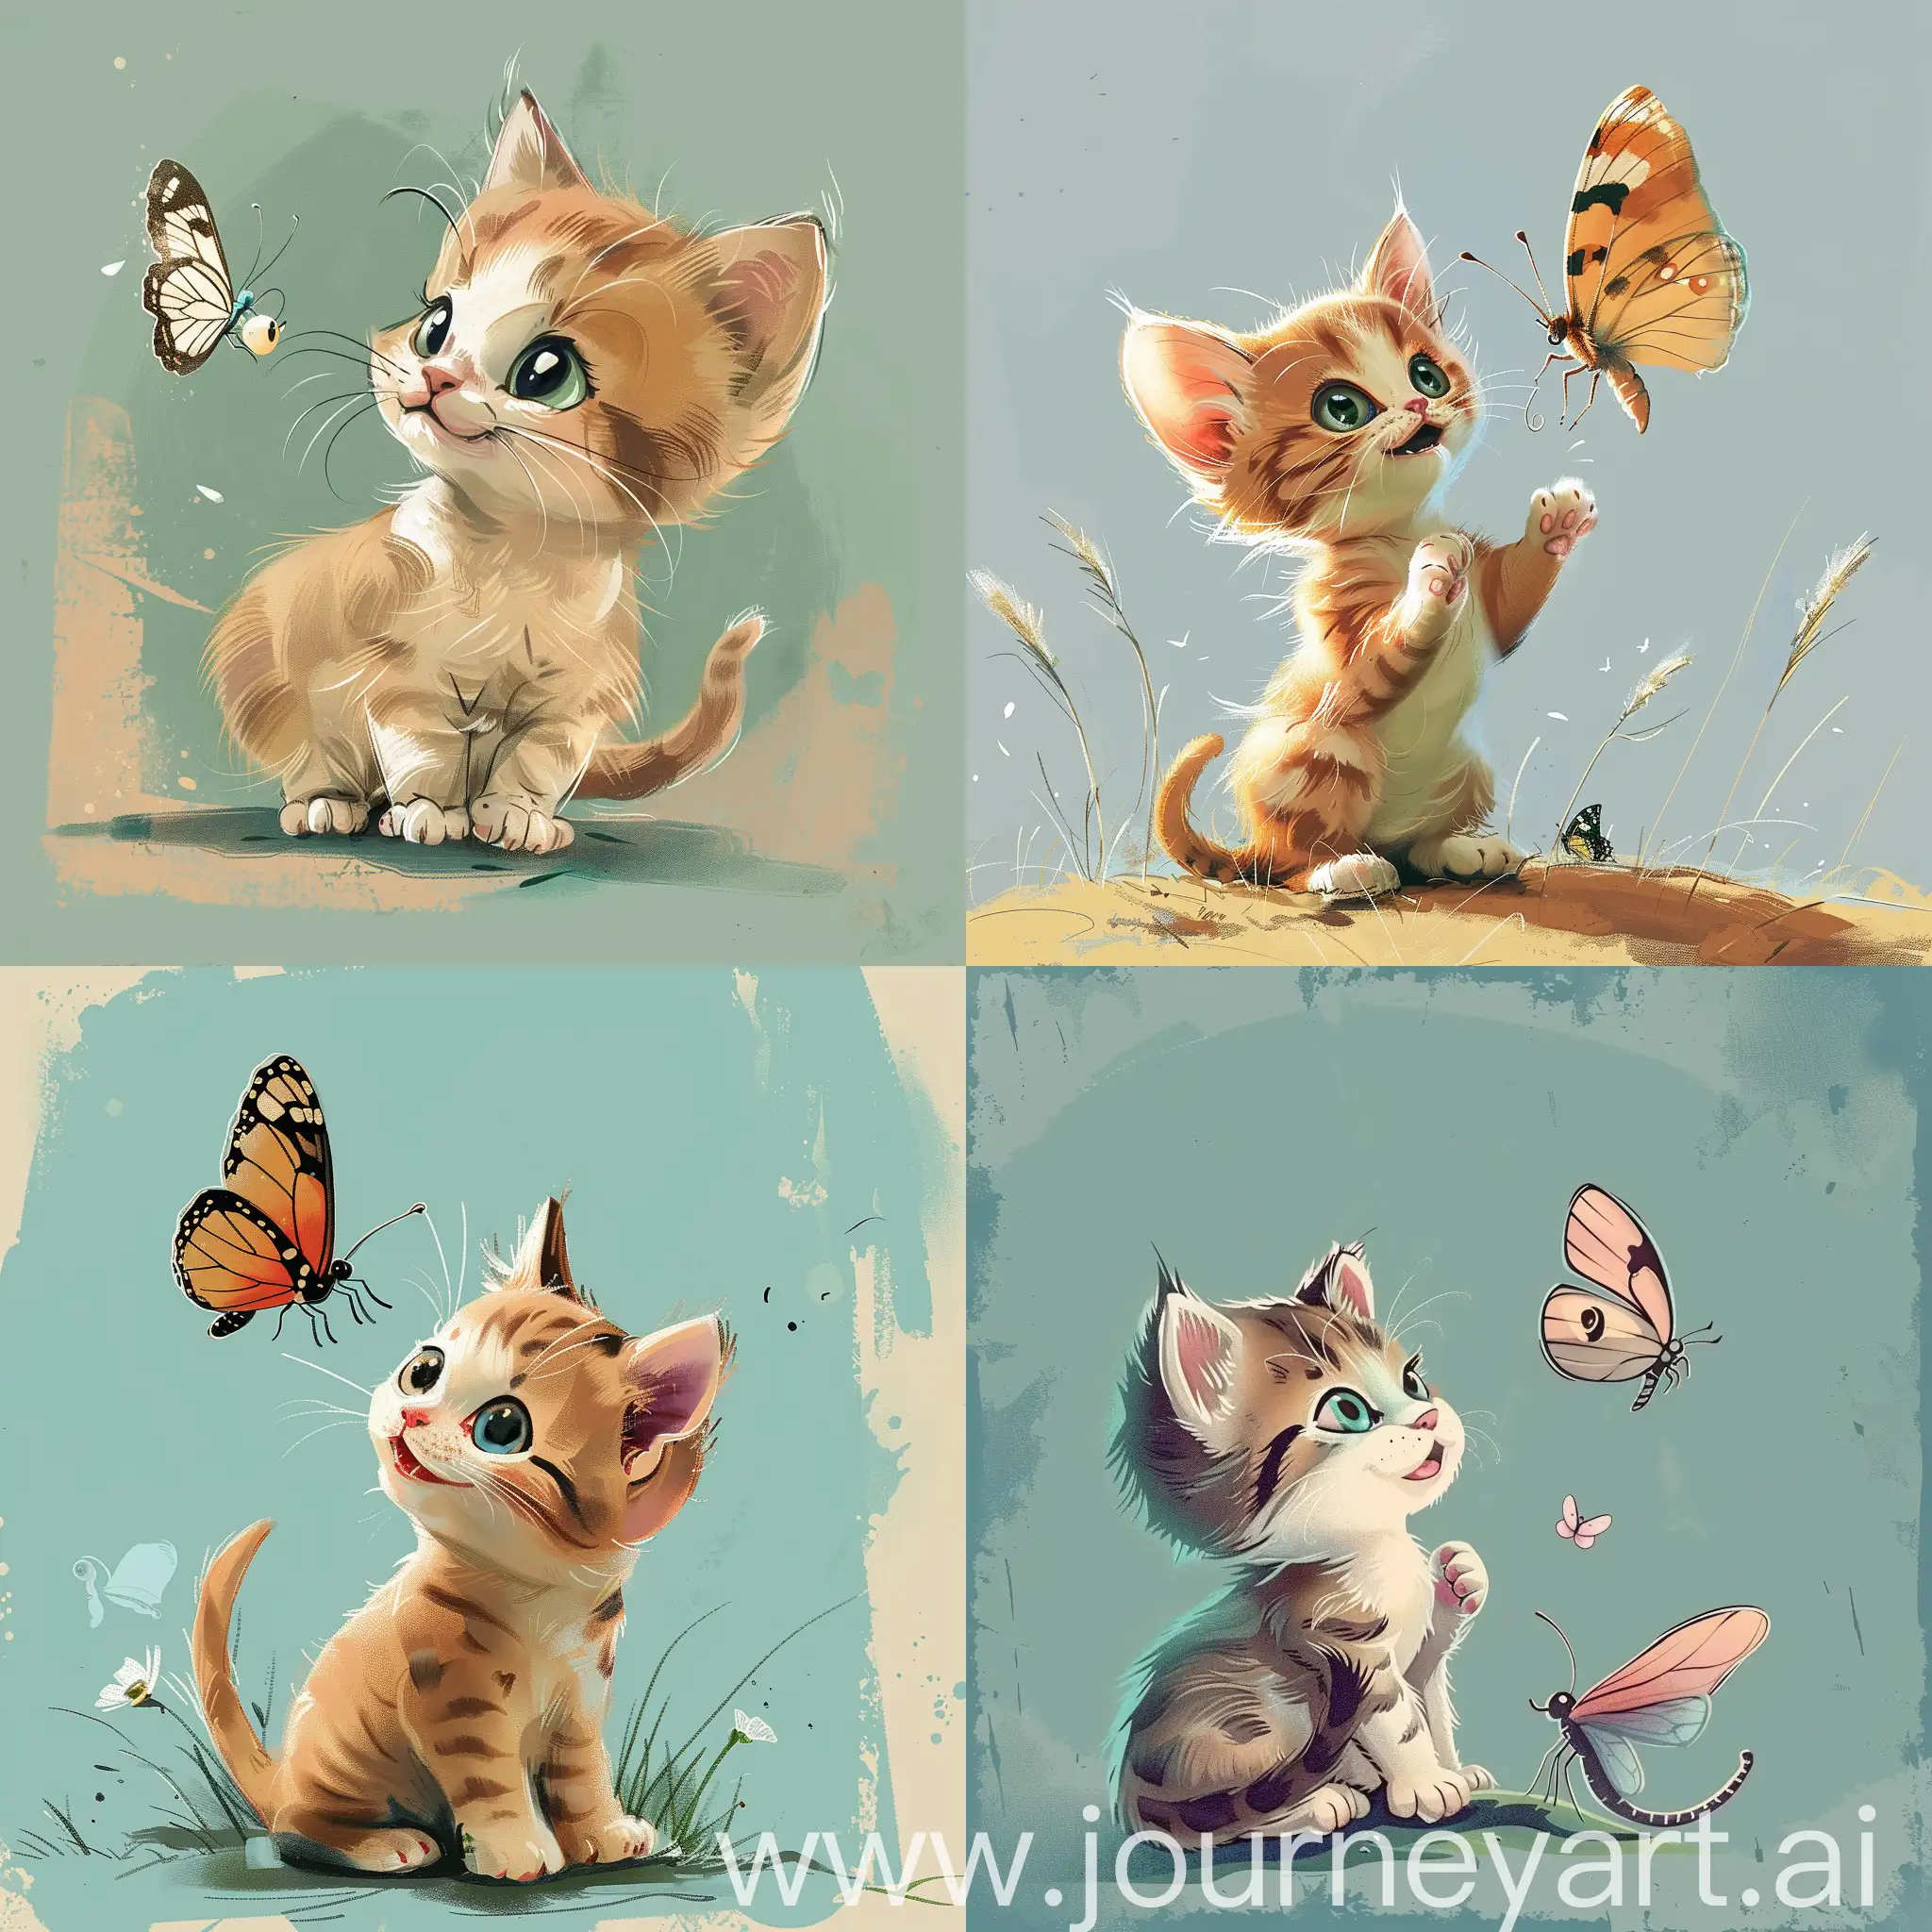 Playful-Cartoon-Kitten-Chasing-Colorful-Butterfly